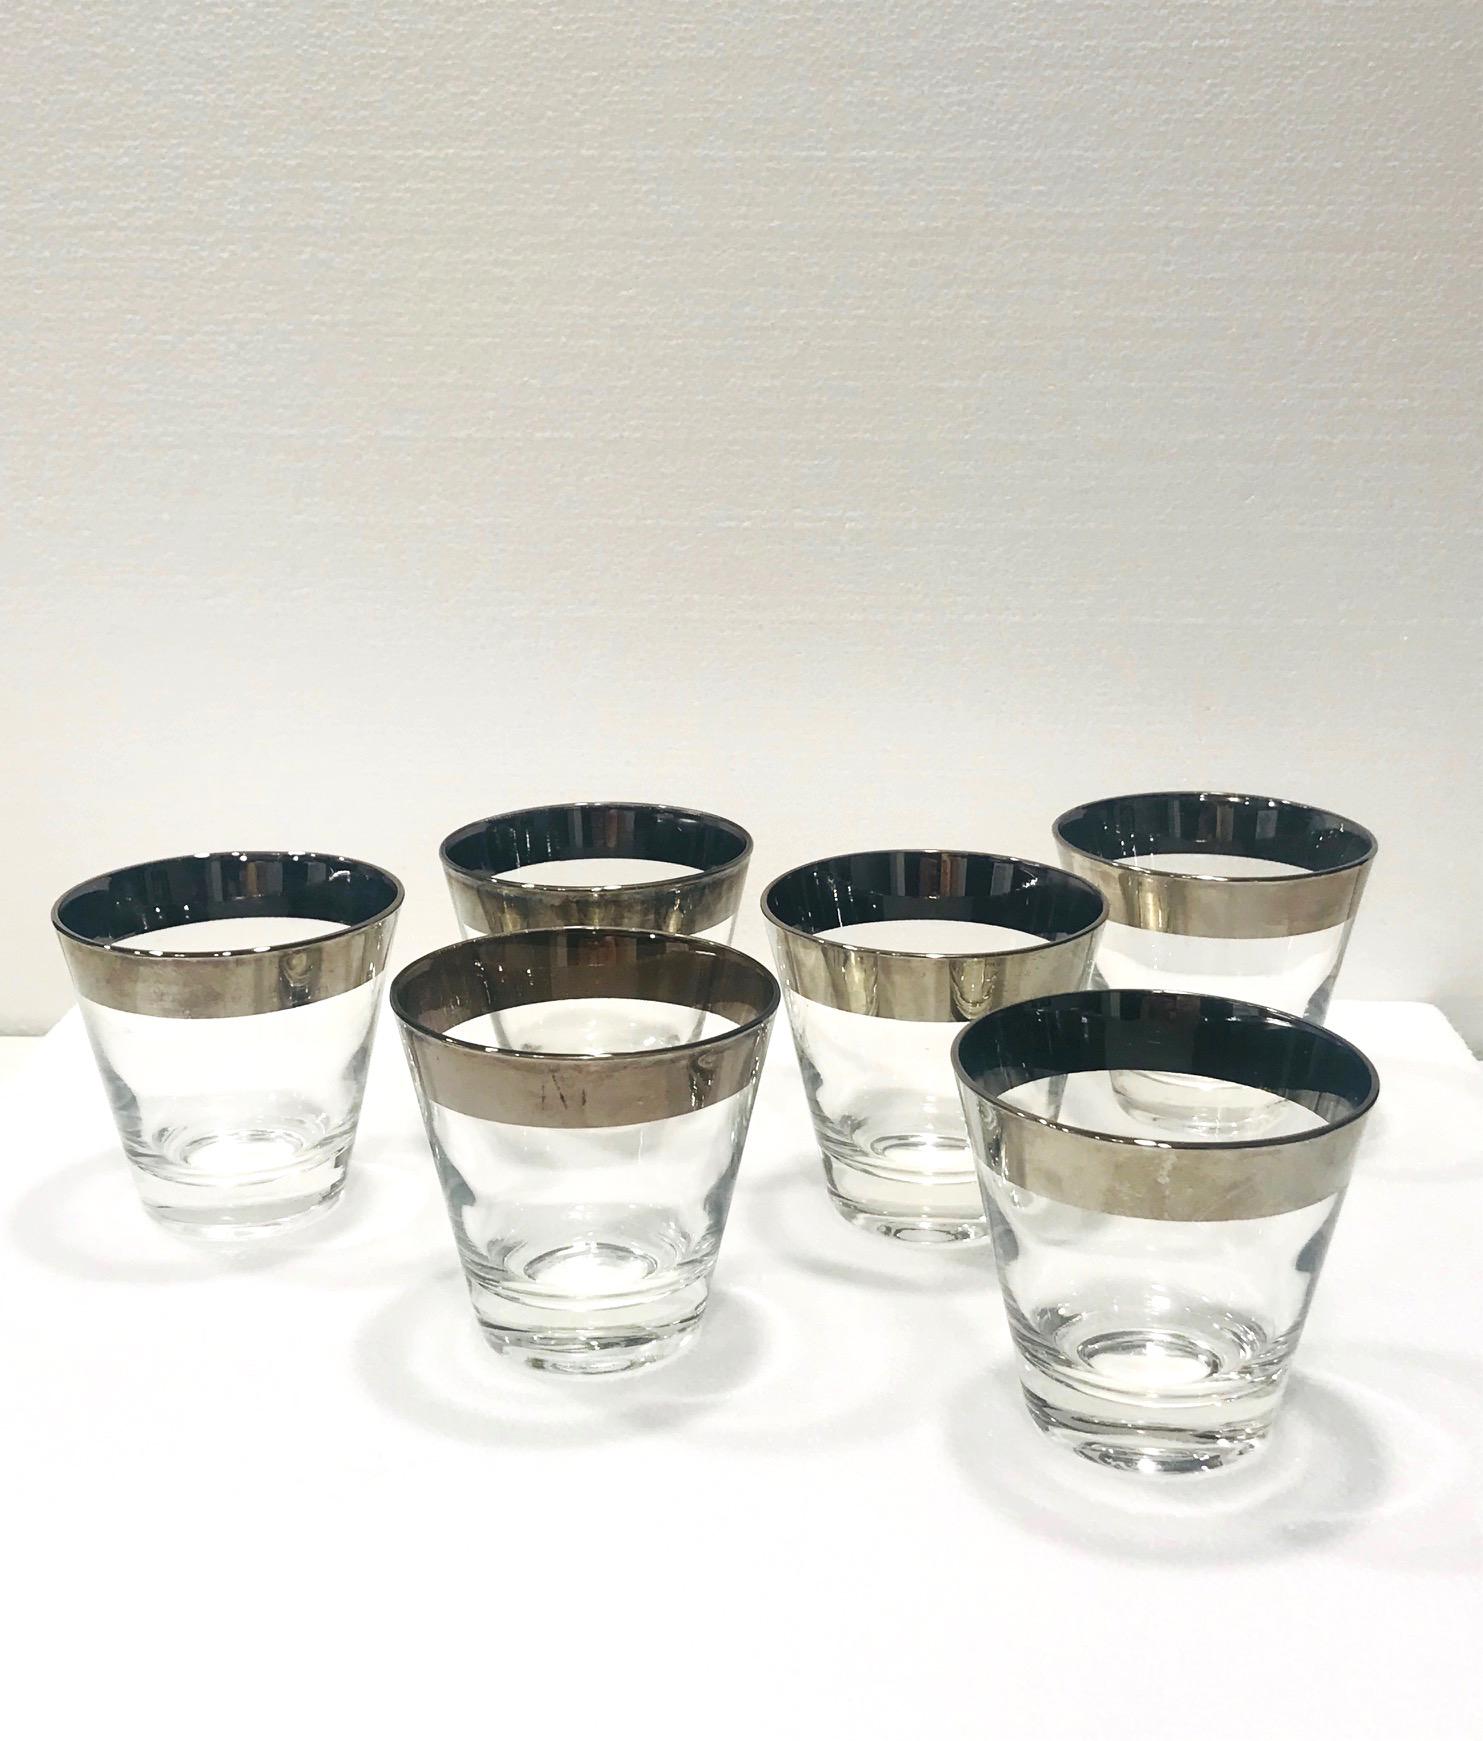 Hand-Crafted Set of Six Barware Glasses with Silver Overlay by Dorothy Thorpe, circa 1960